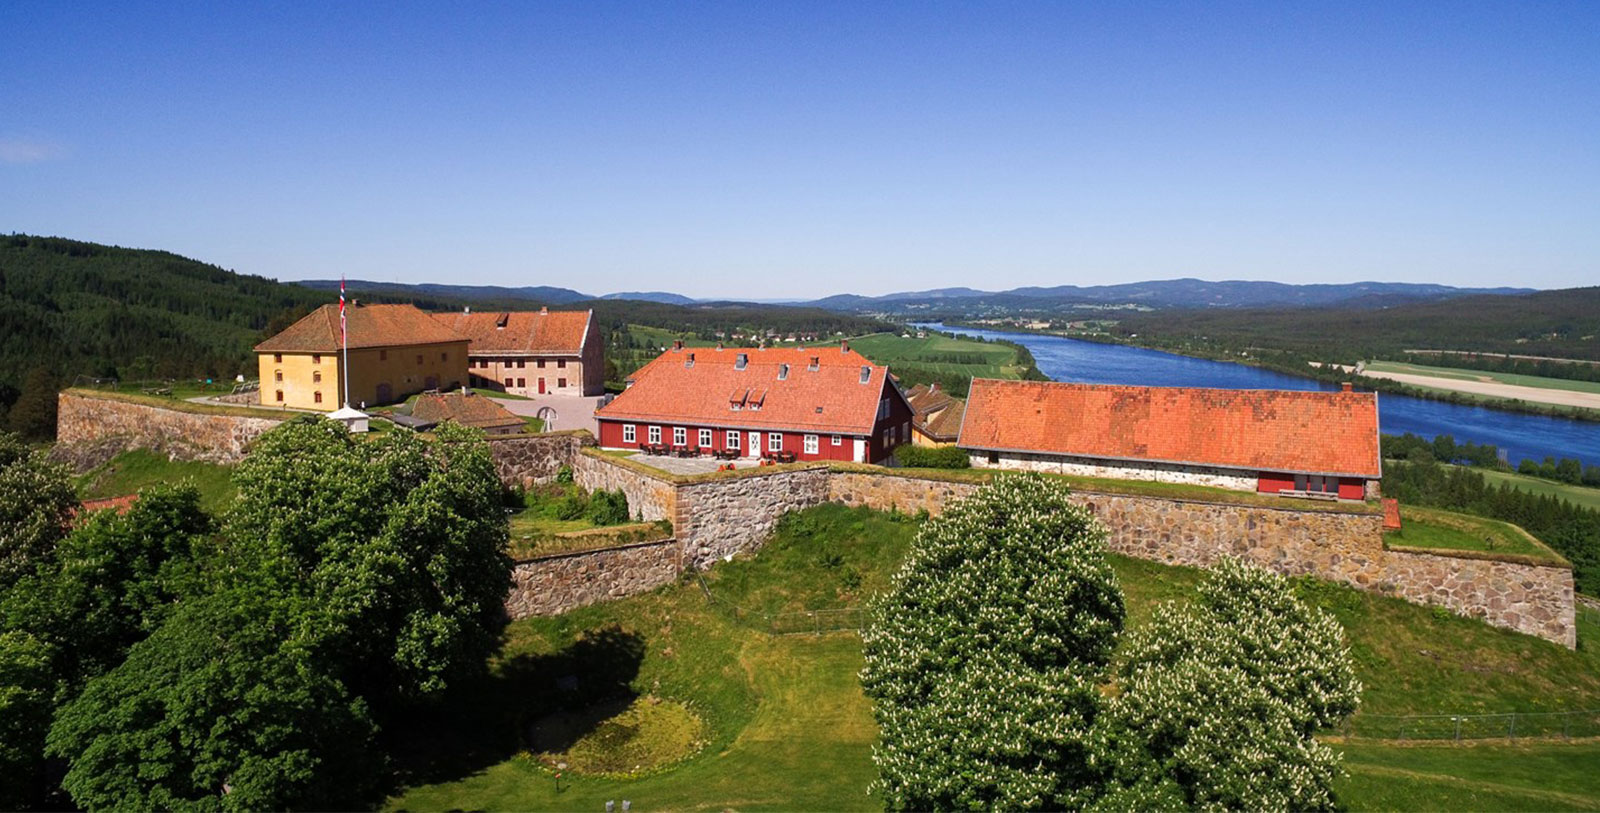 Image of Hotel Exterior Festningen Castle Hotel & Resort, 1673, Member of Historic Hotels Worldwide, in Kongsvinger, Norway, Special Offers, Discounted Rates, Families, Romantic Escape, Honeymoons, Anniversaries, Reunions